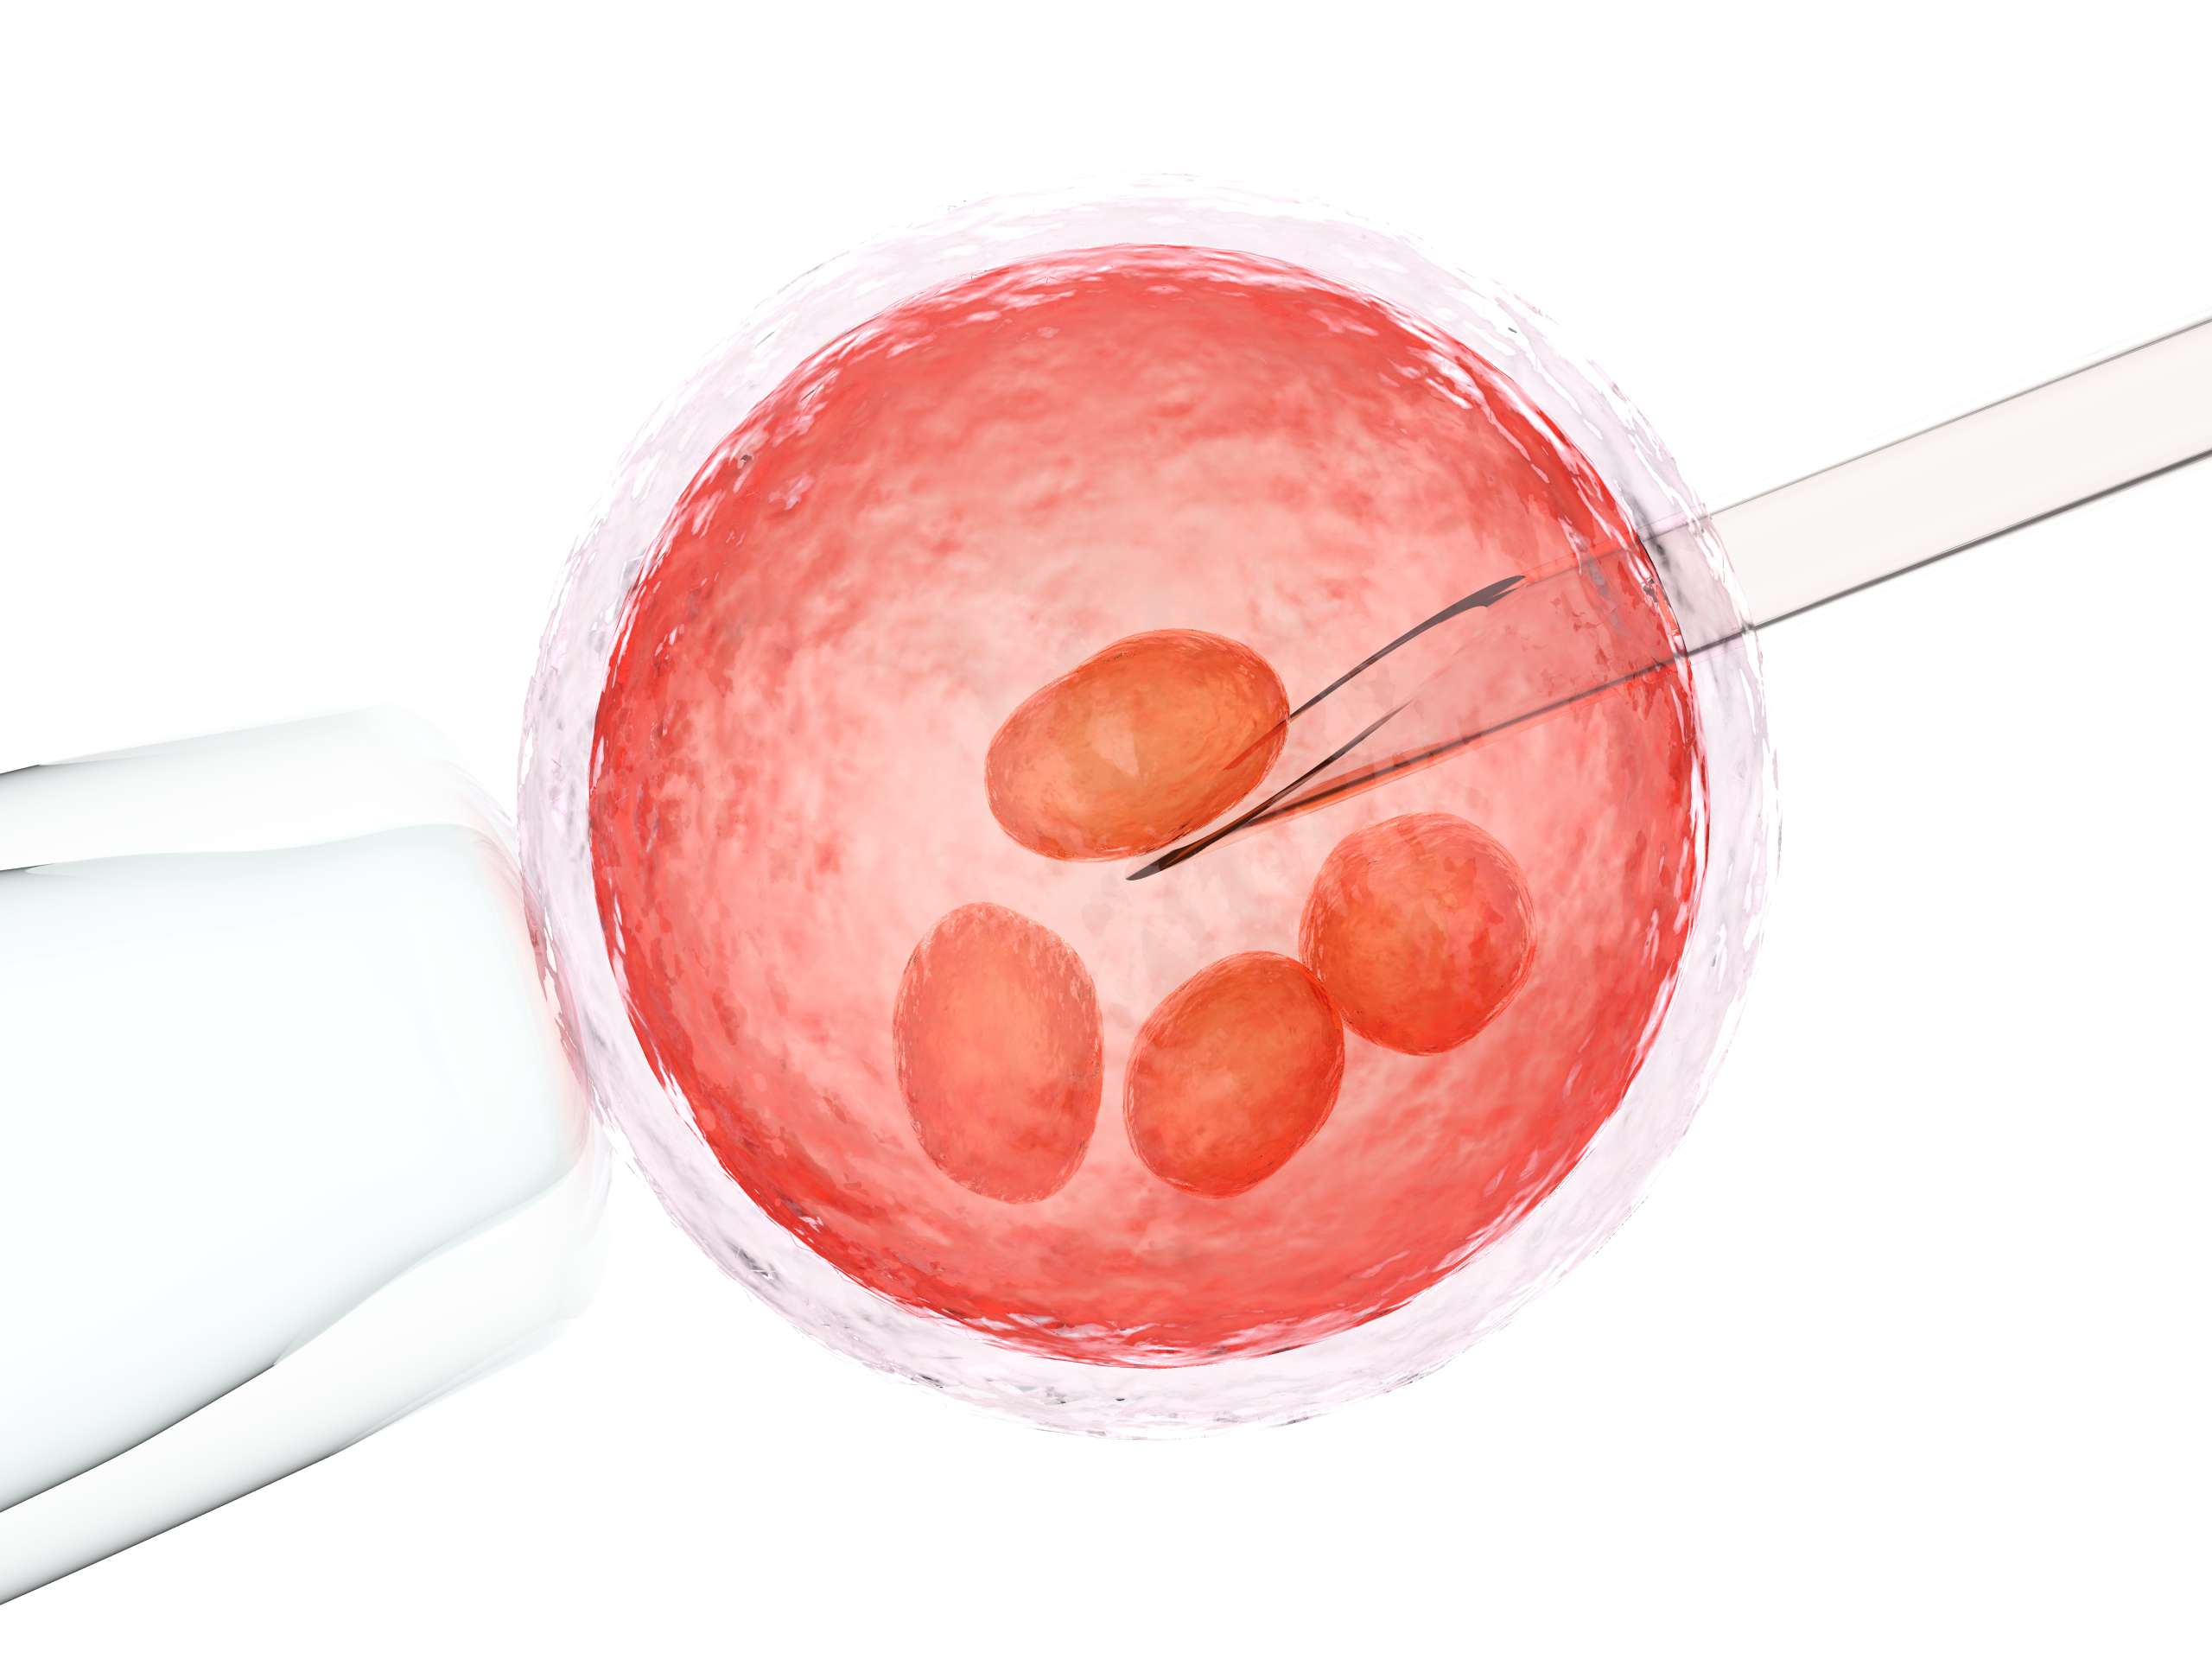 9 Things You Should Know Before Considering IVF